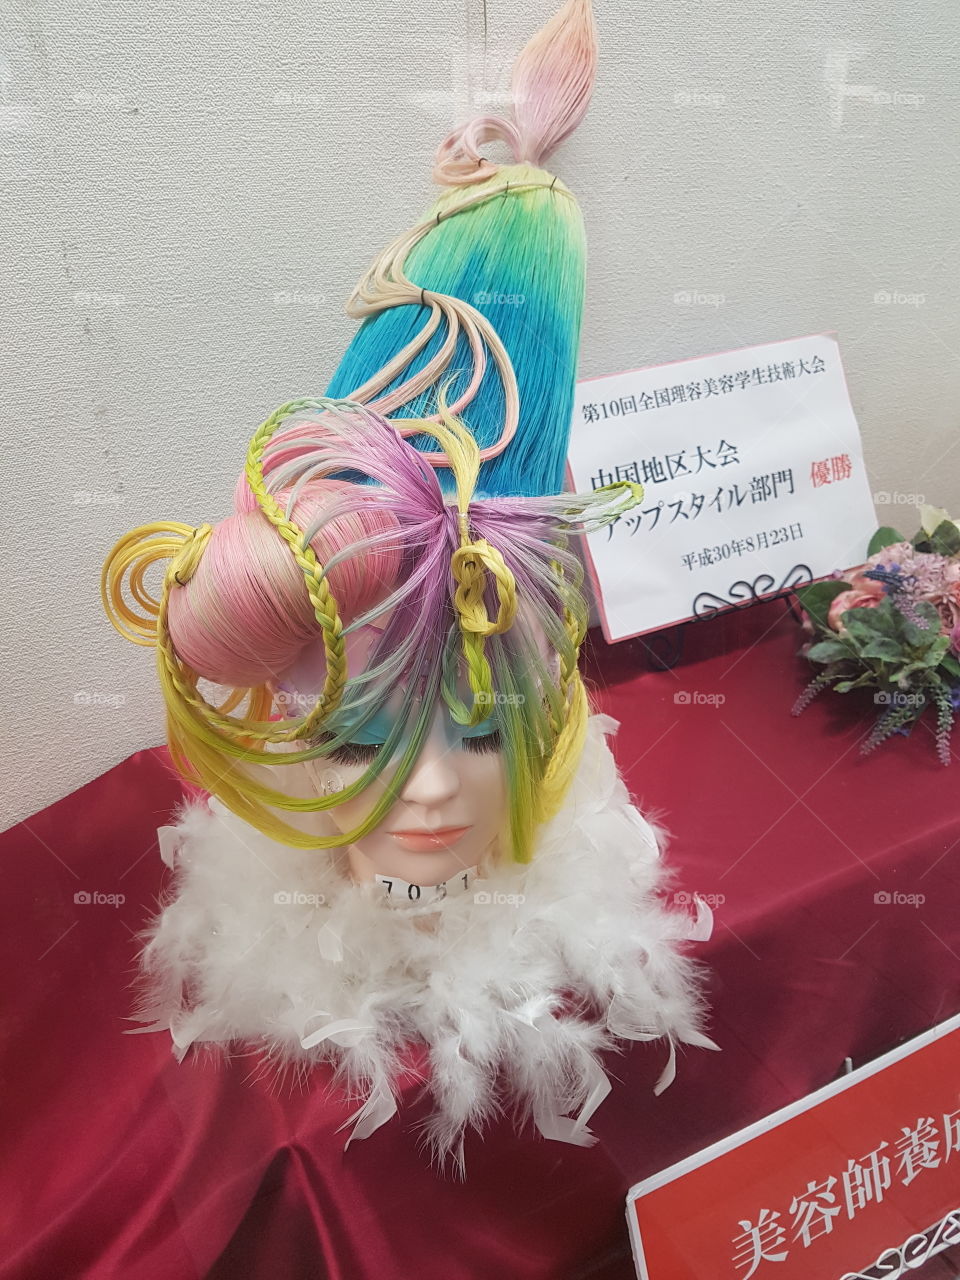 A wig styling competition.